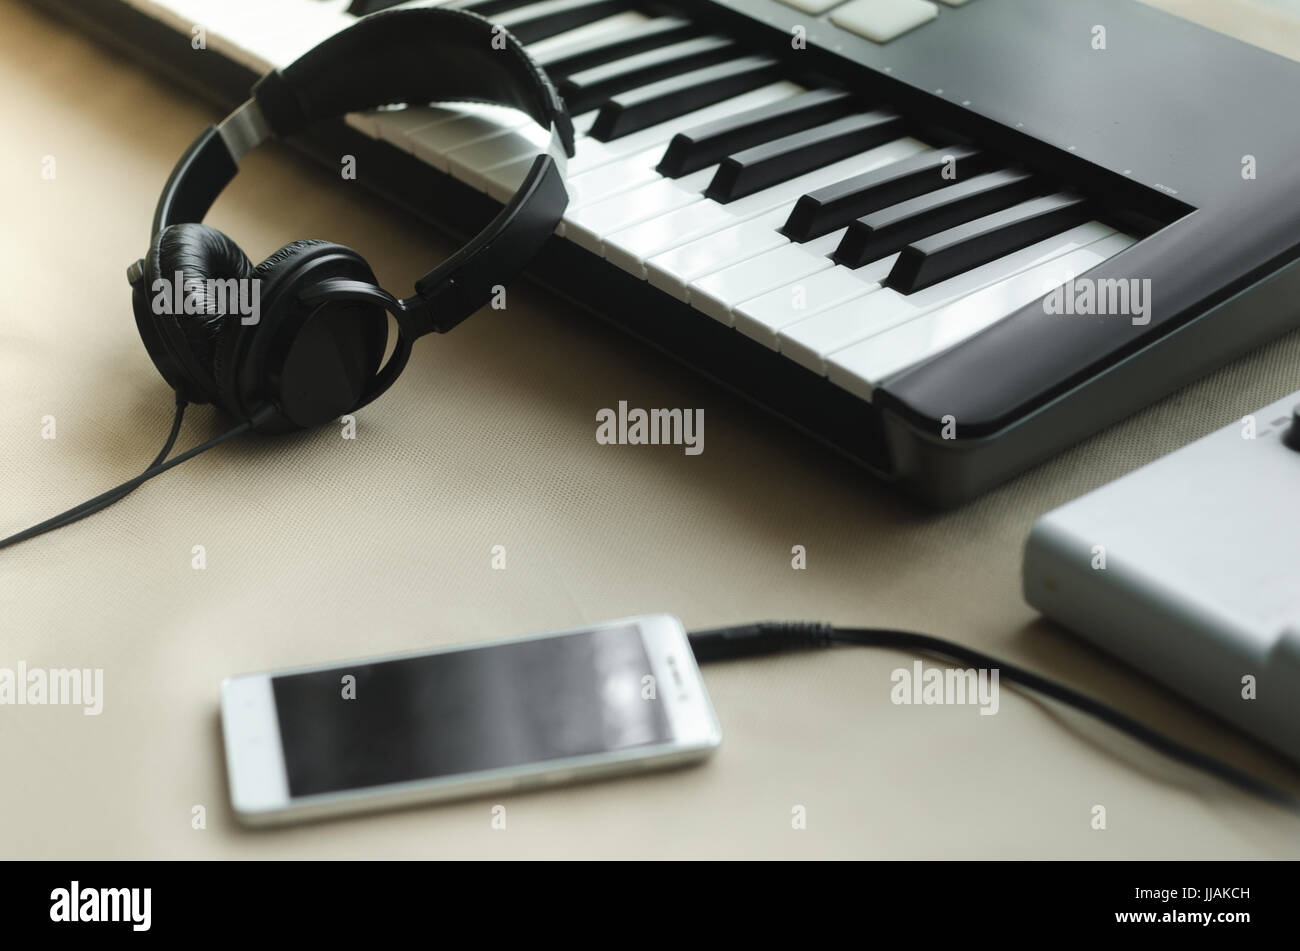 Headphones, synthesizer and a telephone lying on a beige background next to the music console. Side view Stock Photo